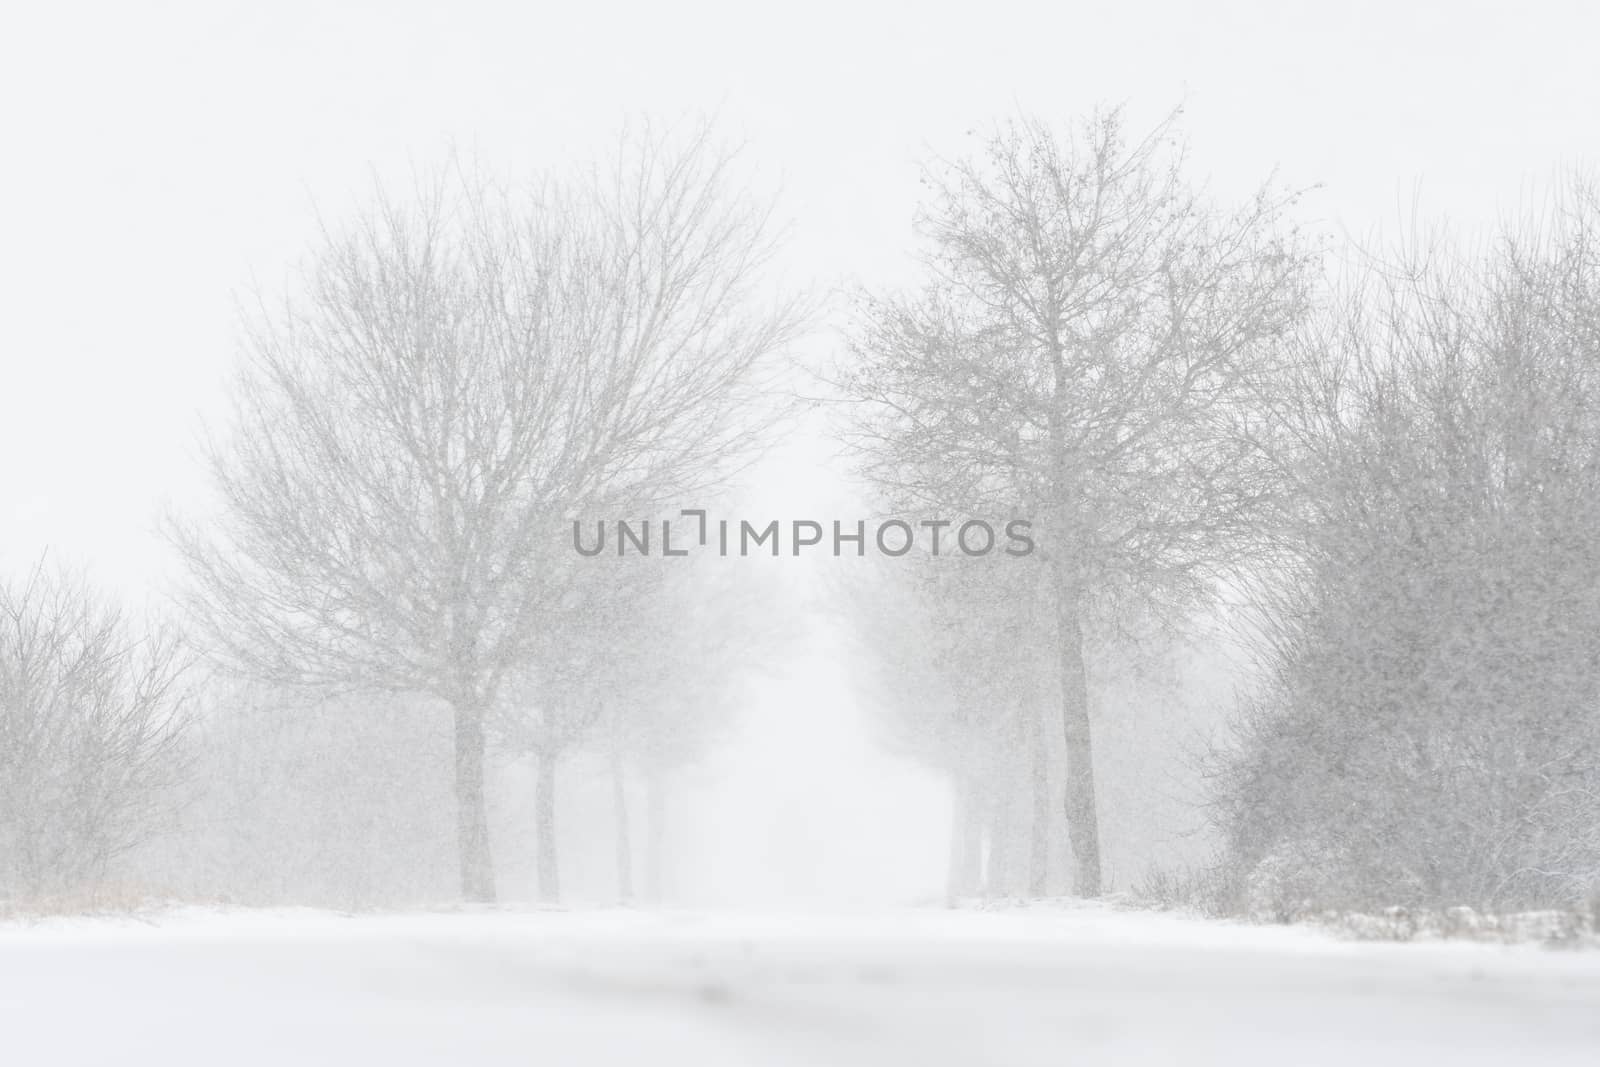 Road with trees and strong snowfall by w20er